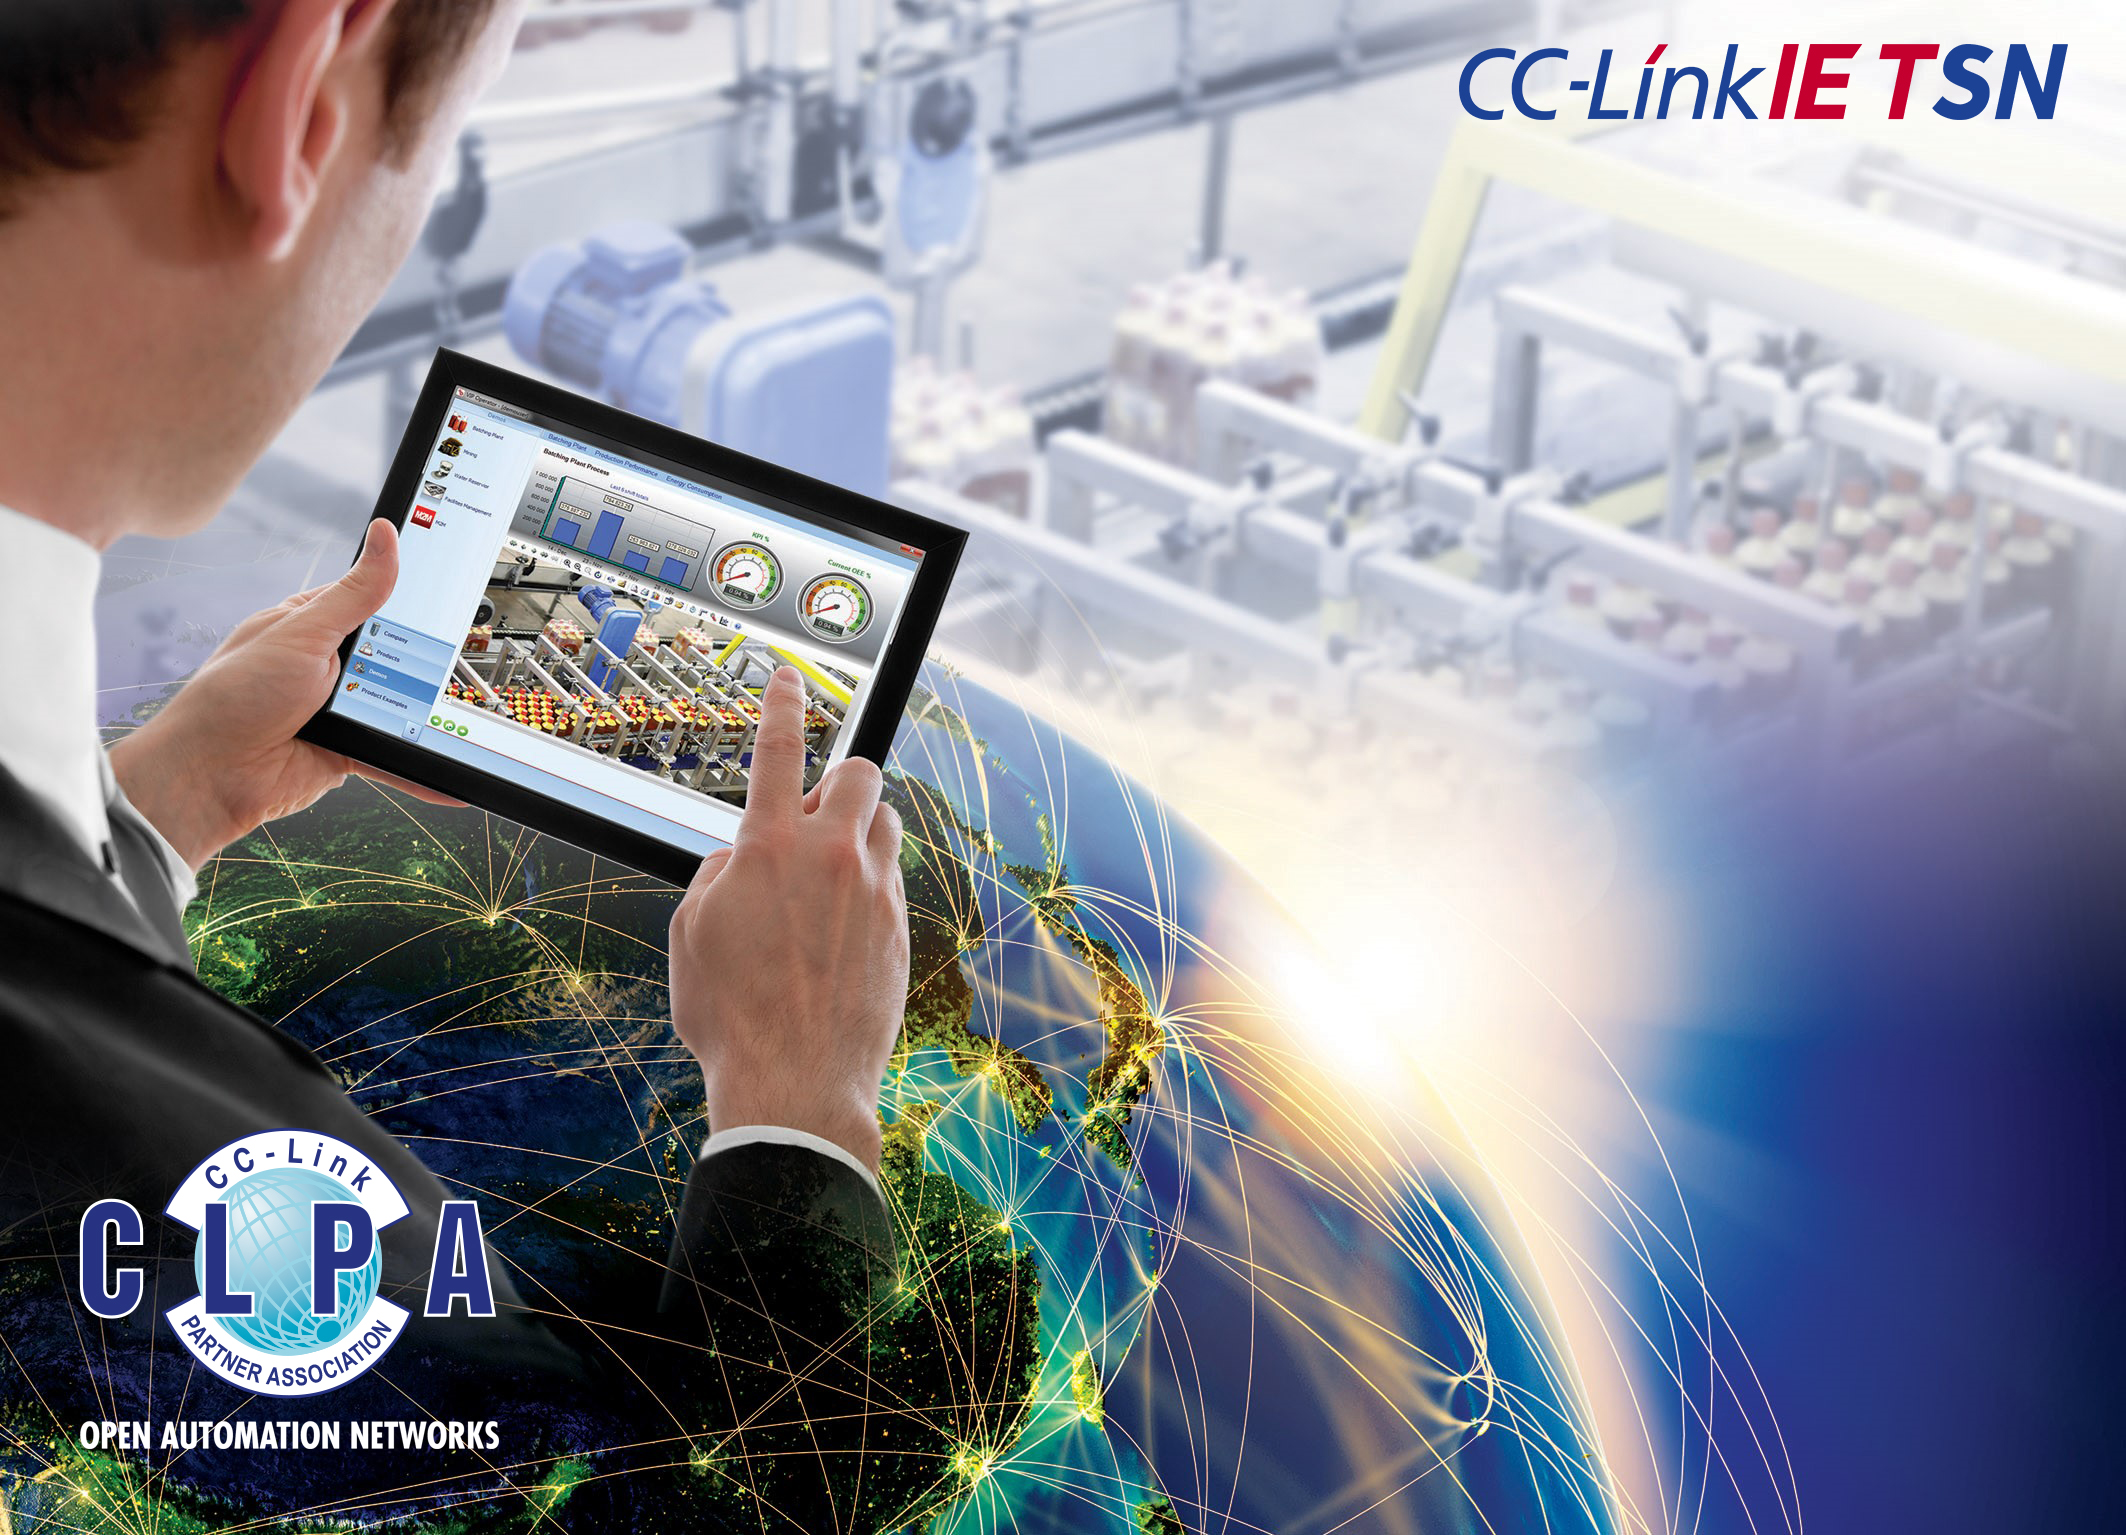 CC-Link IE TSN can support these 100Mbit devices in addition to 1Gbps equipment and is easily implemented on devices or master controllers by software alone, enabling compatibility to be added to existing products without any hardware modification.